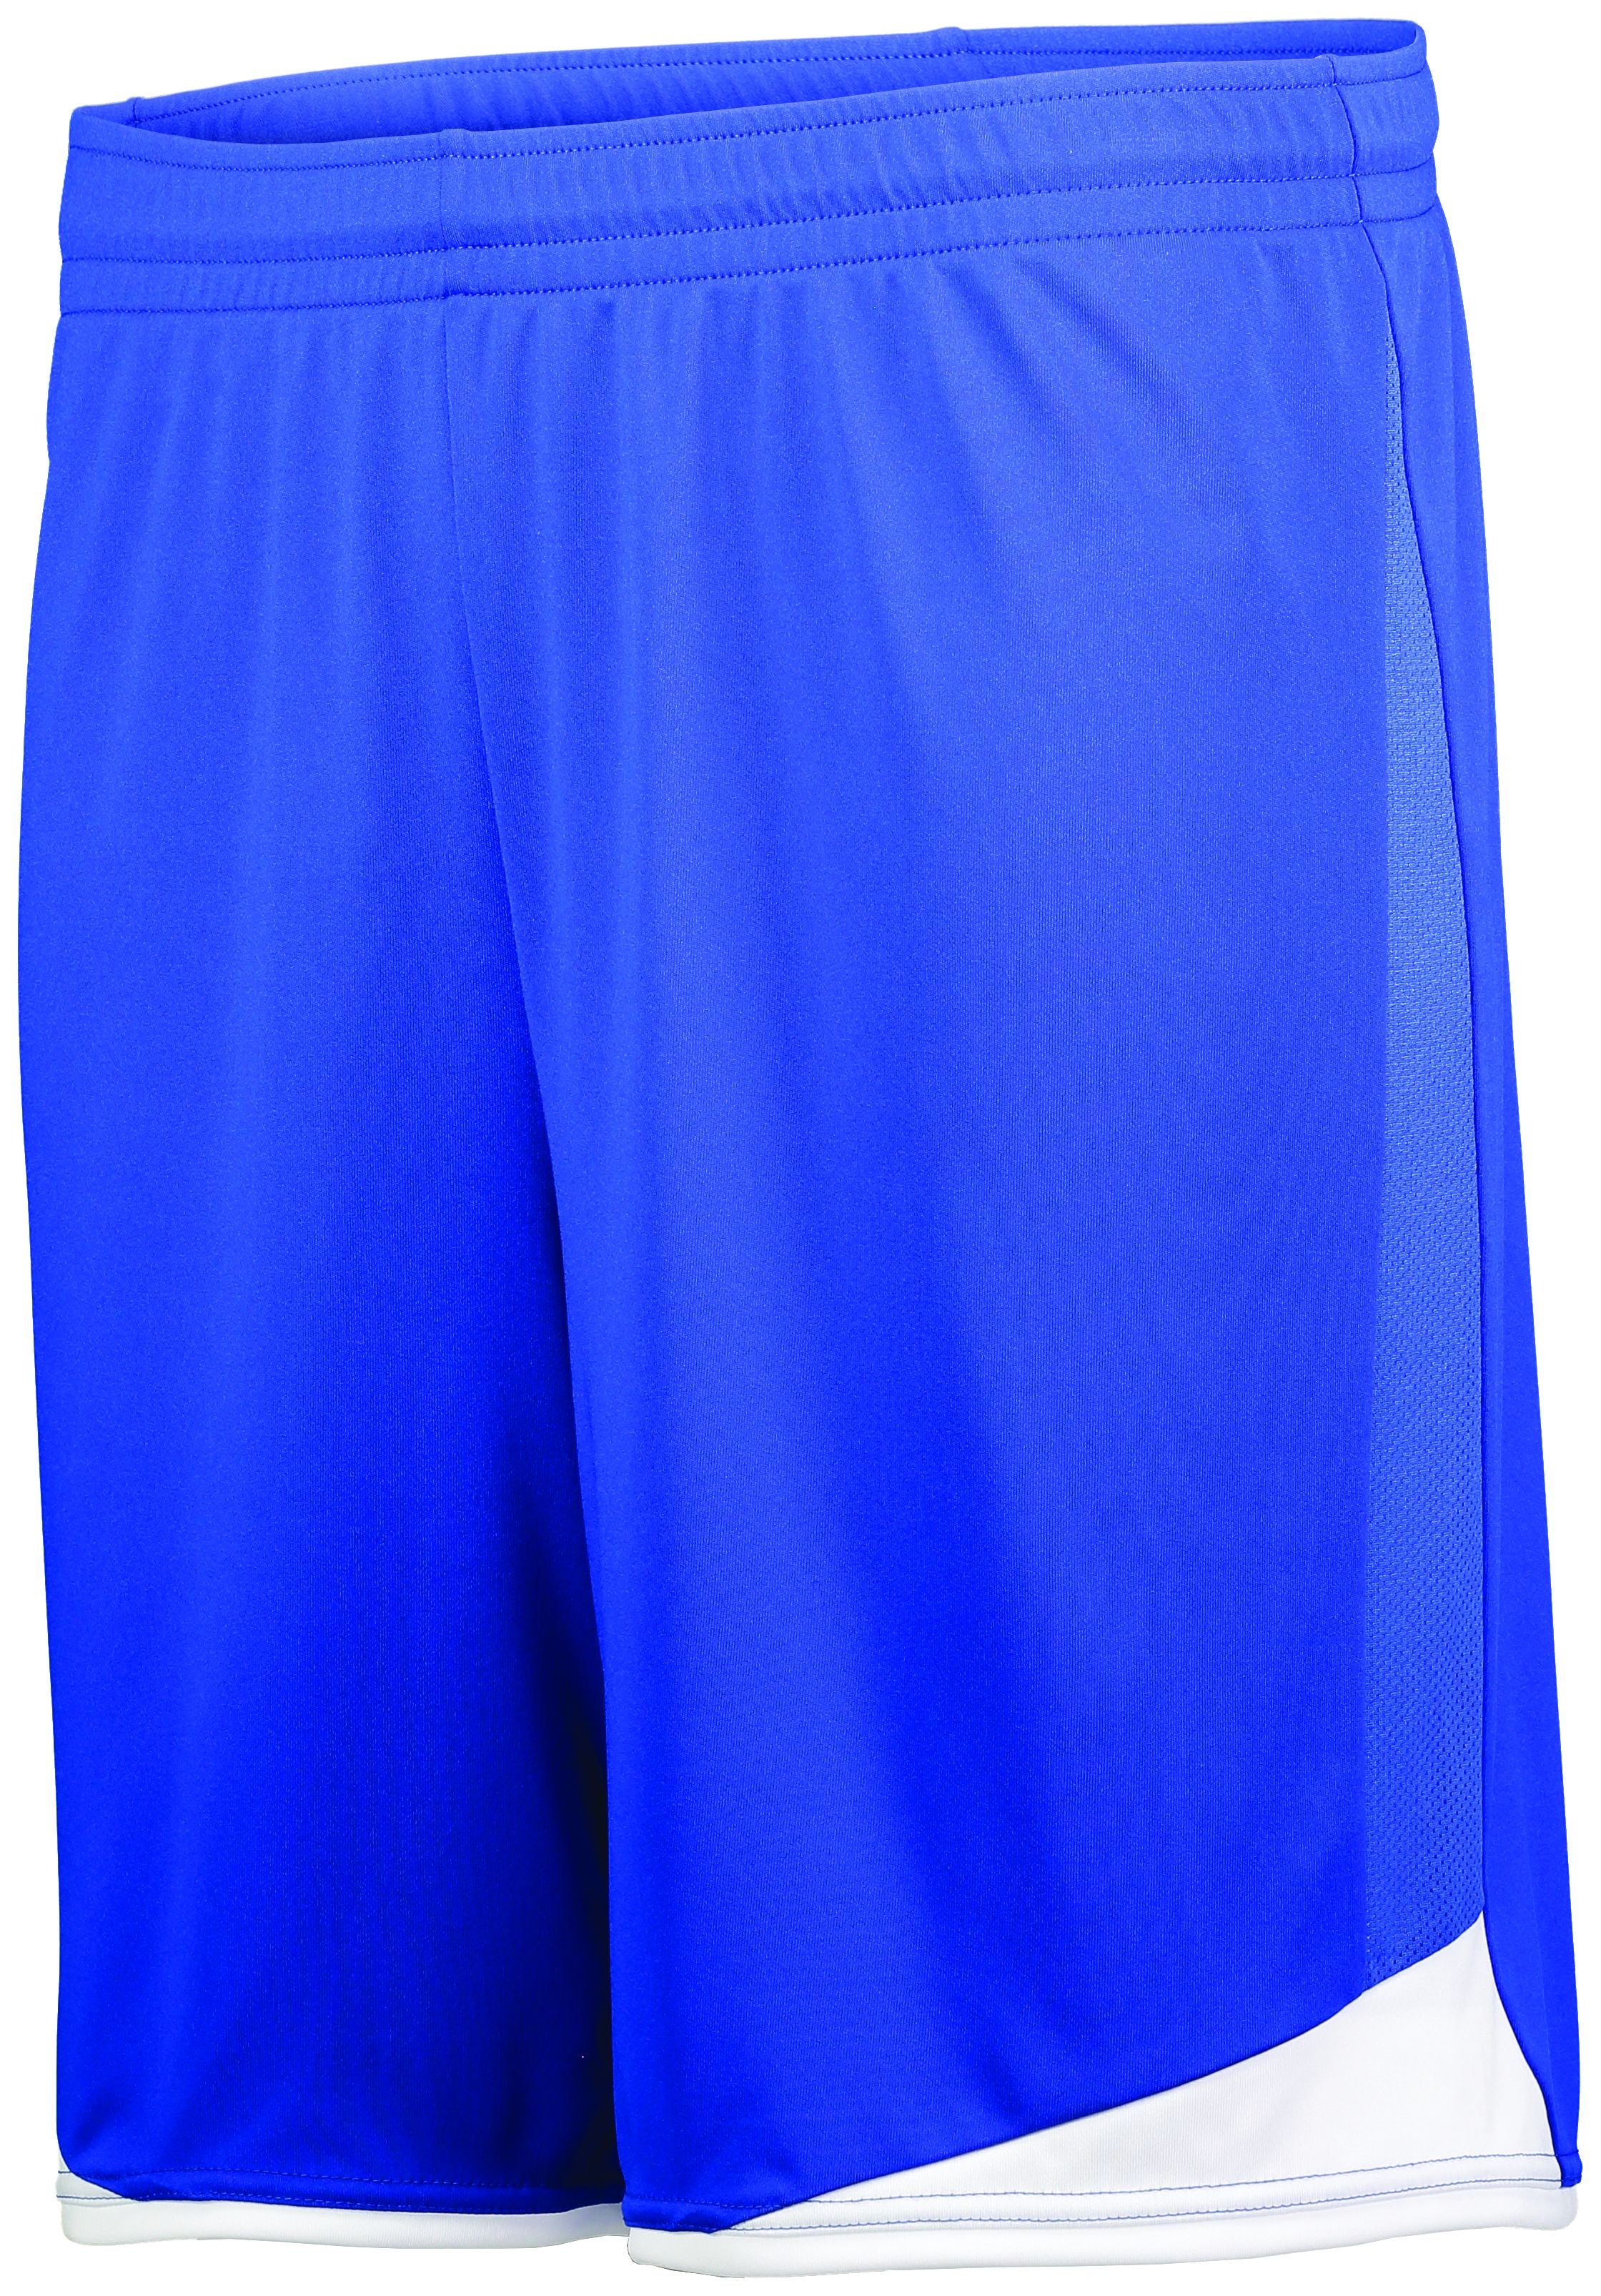 High 5 Youth Stamford Soccer Shorts in Royal/White  -Part of the Youth, Youth-Shorts, High5-Products, Soccer, All-Sports-1 product lines at KanaleyCreations.com